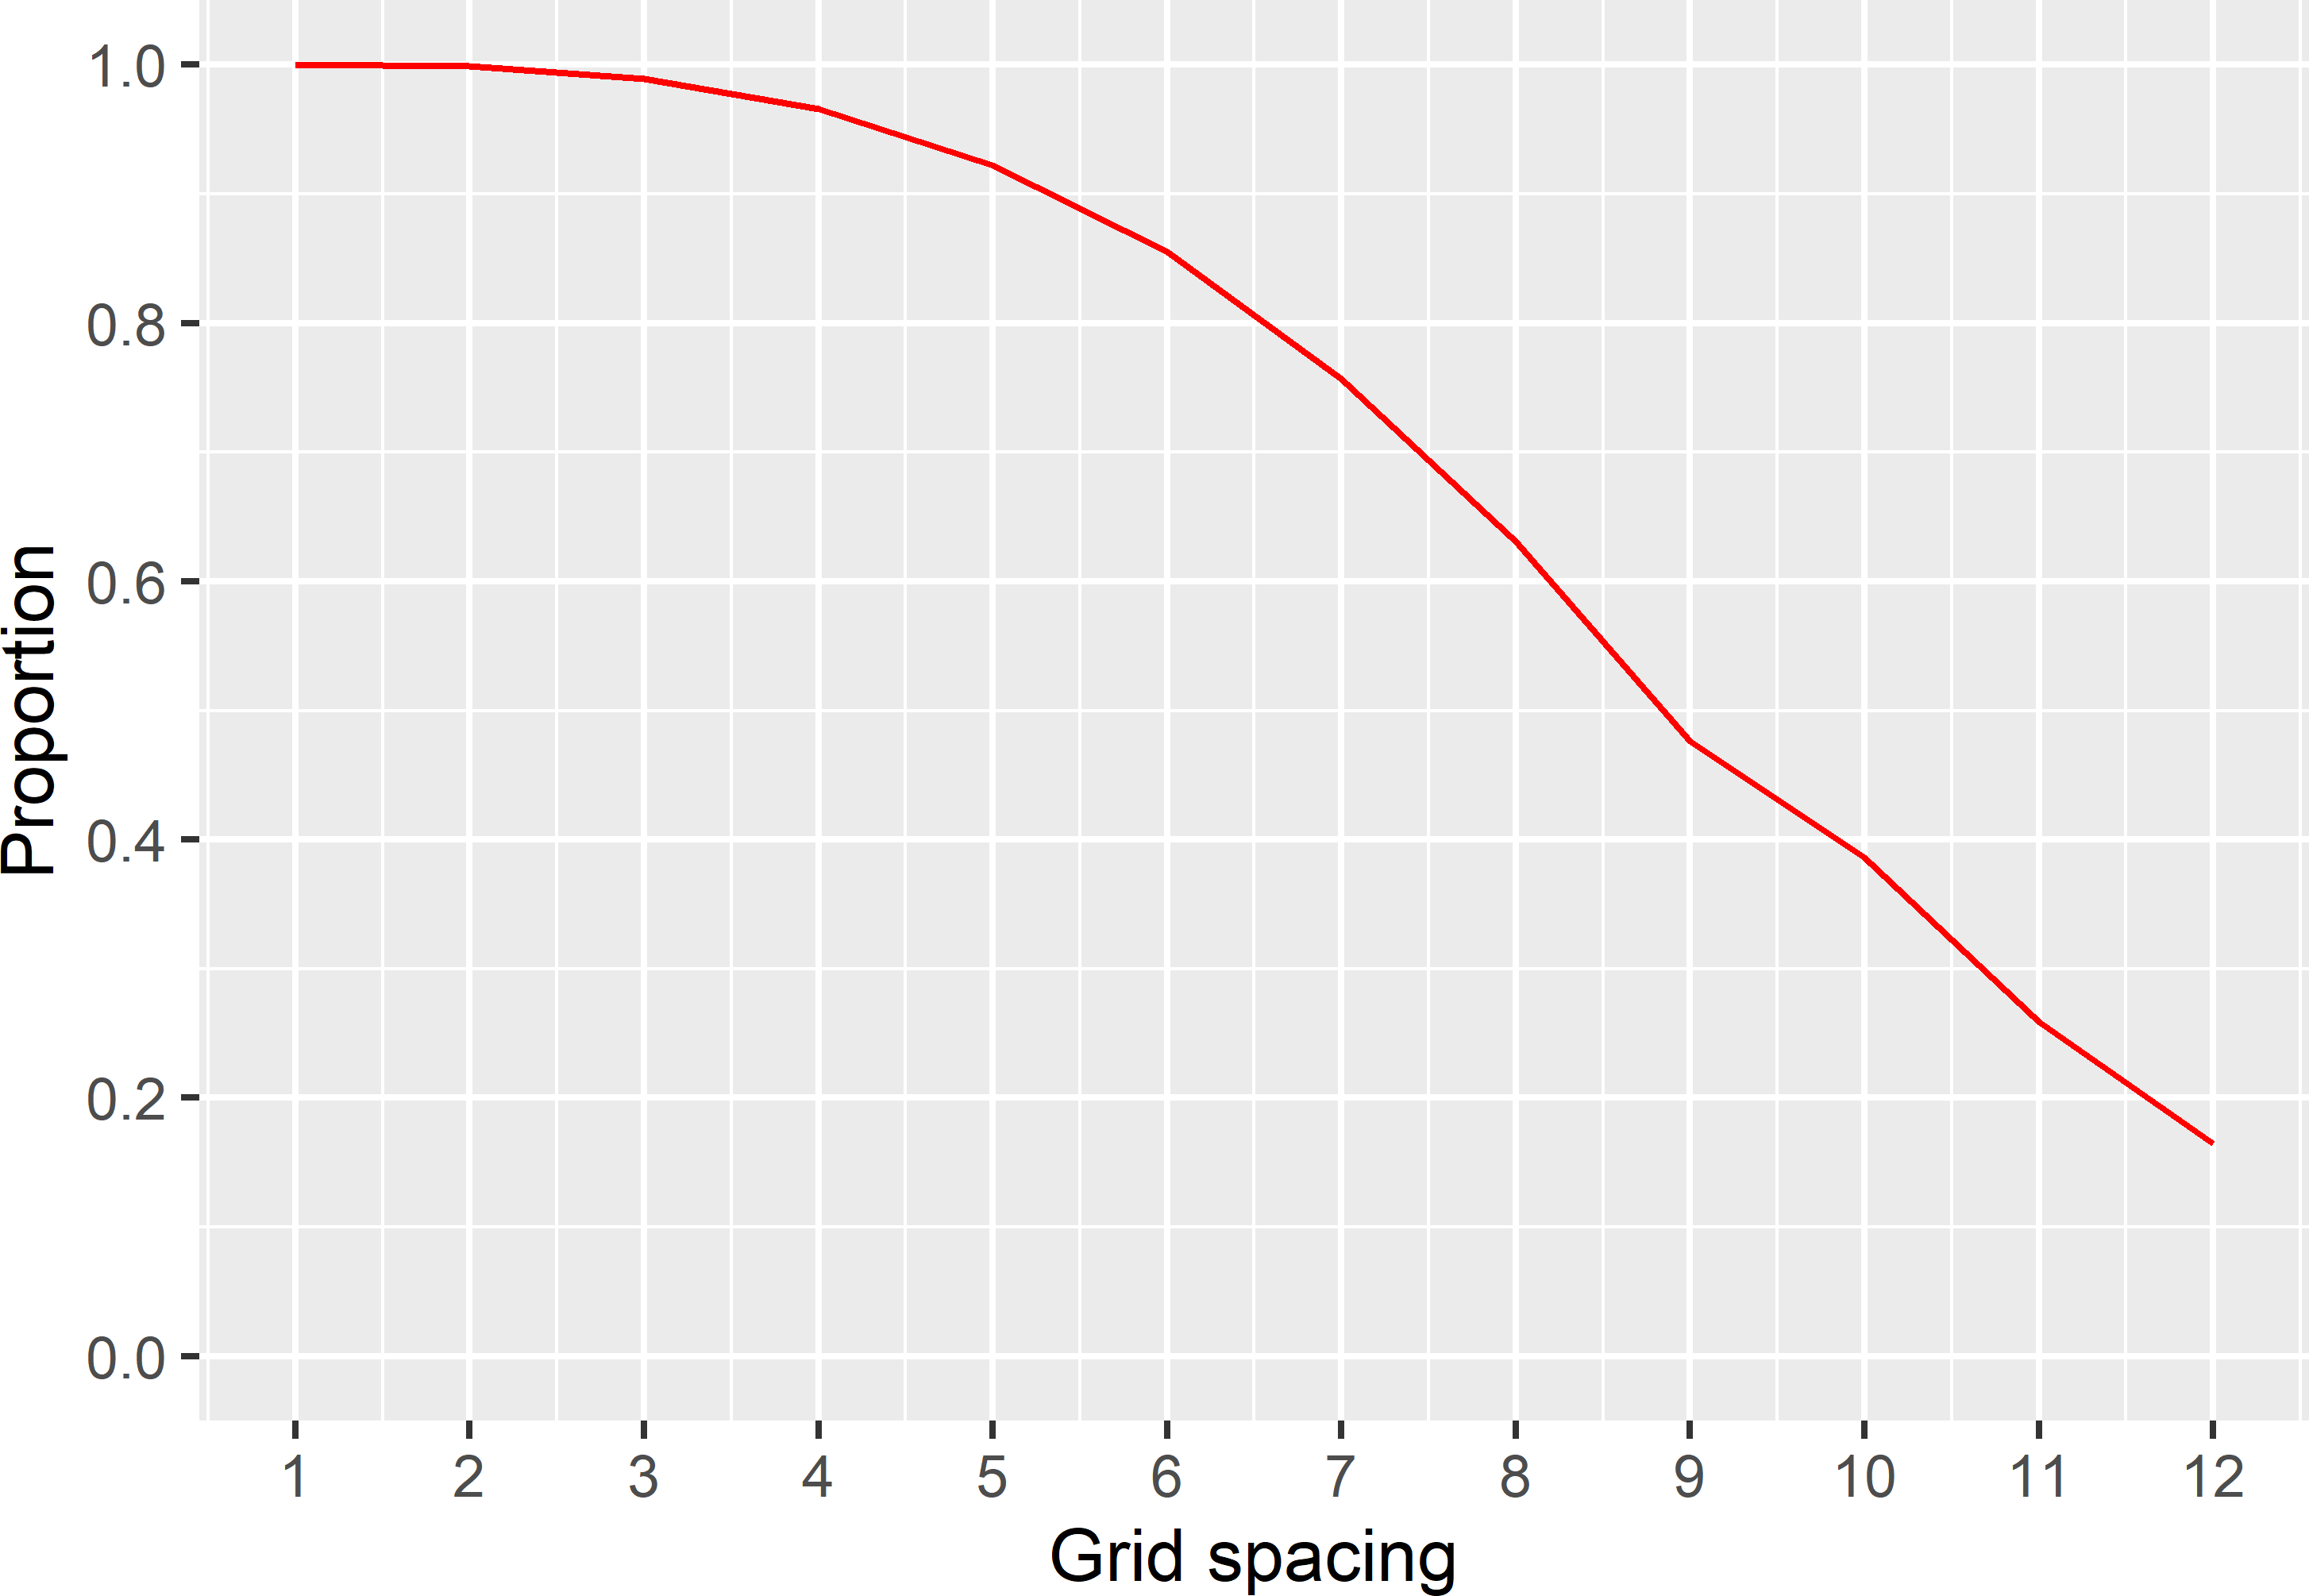 Proportion of sampled semivariograms with a MKV smaller than or equal to a target MKV of 0.8.